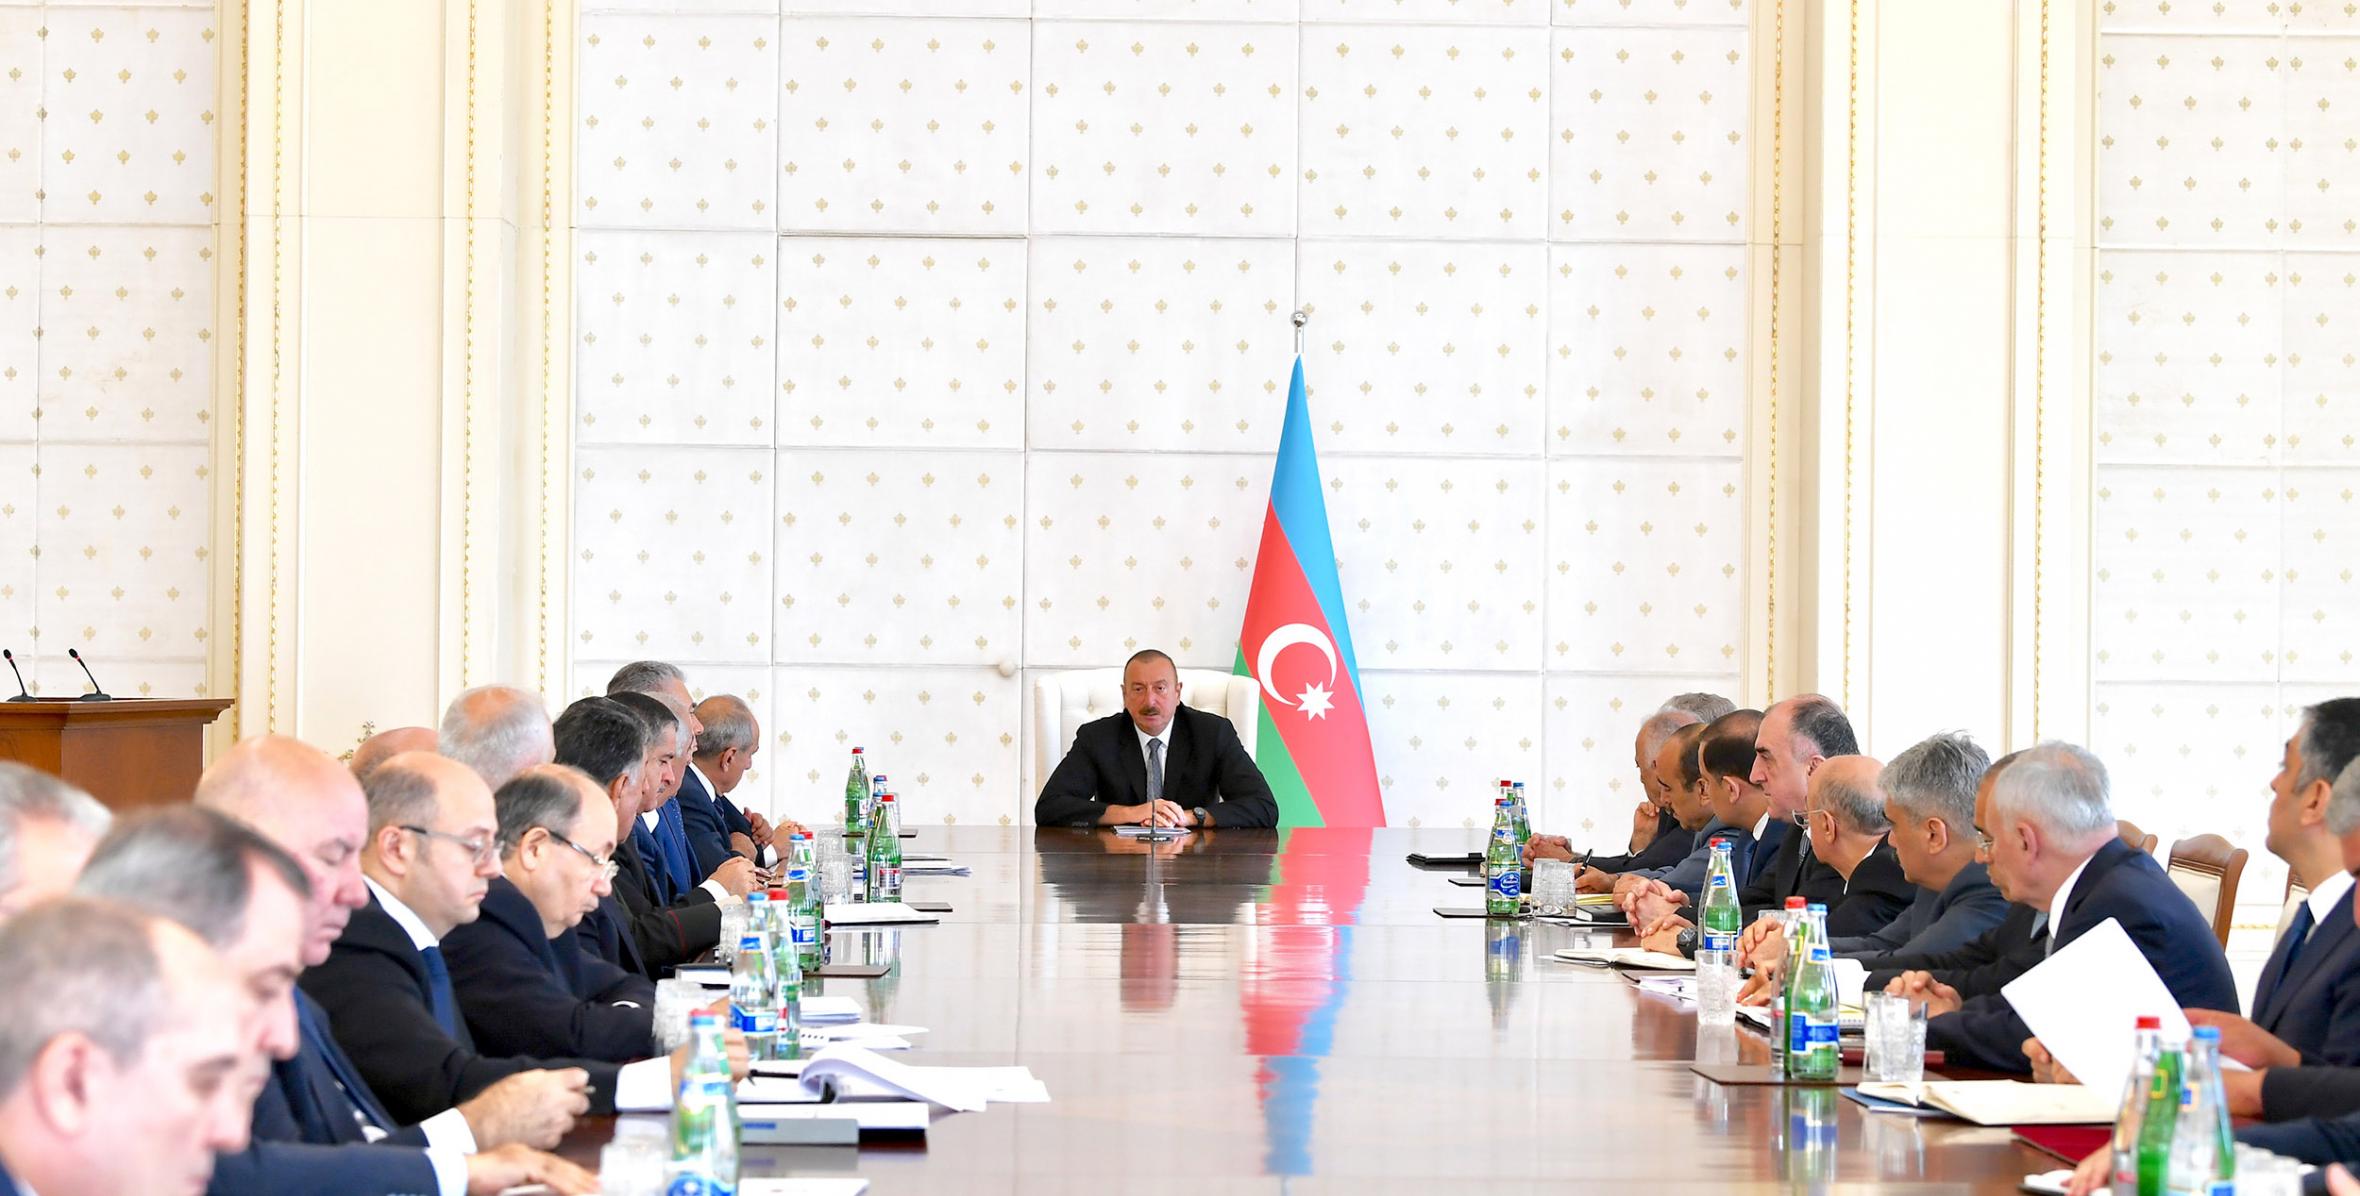 Ilham Aliyev chaired meeting of Cabinet of Ministers dedicated to results of socio-economic development in first half of 2018 and future objectives